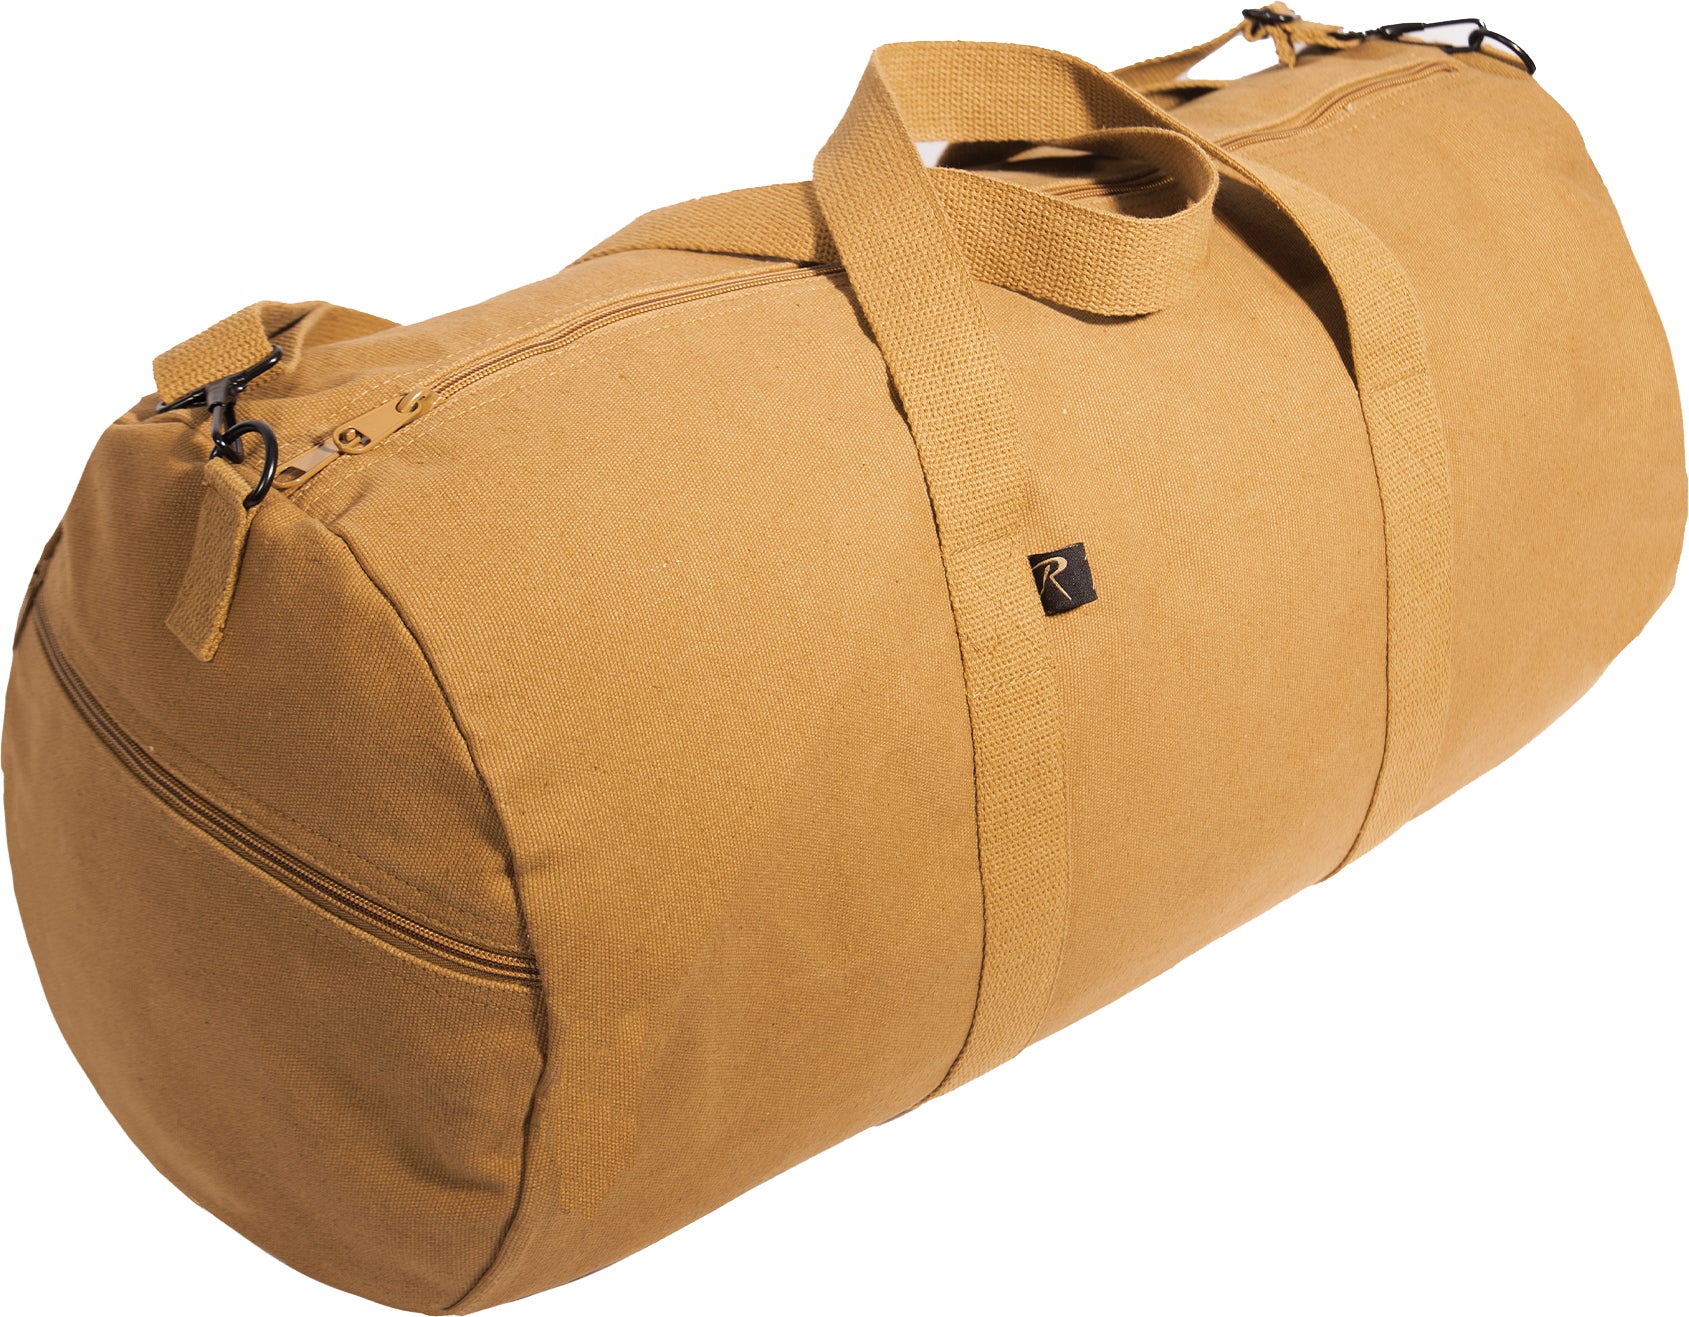 Coyote Brown Heavyweight Cotton Canvas Duffle Bag Sports Gym Shoulder & Carry Bag 24